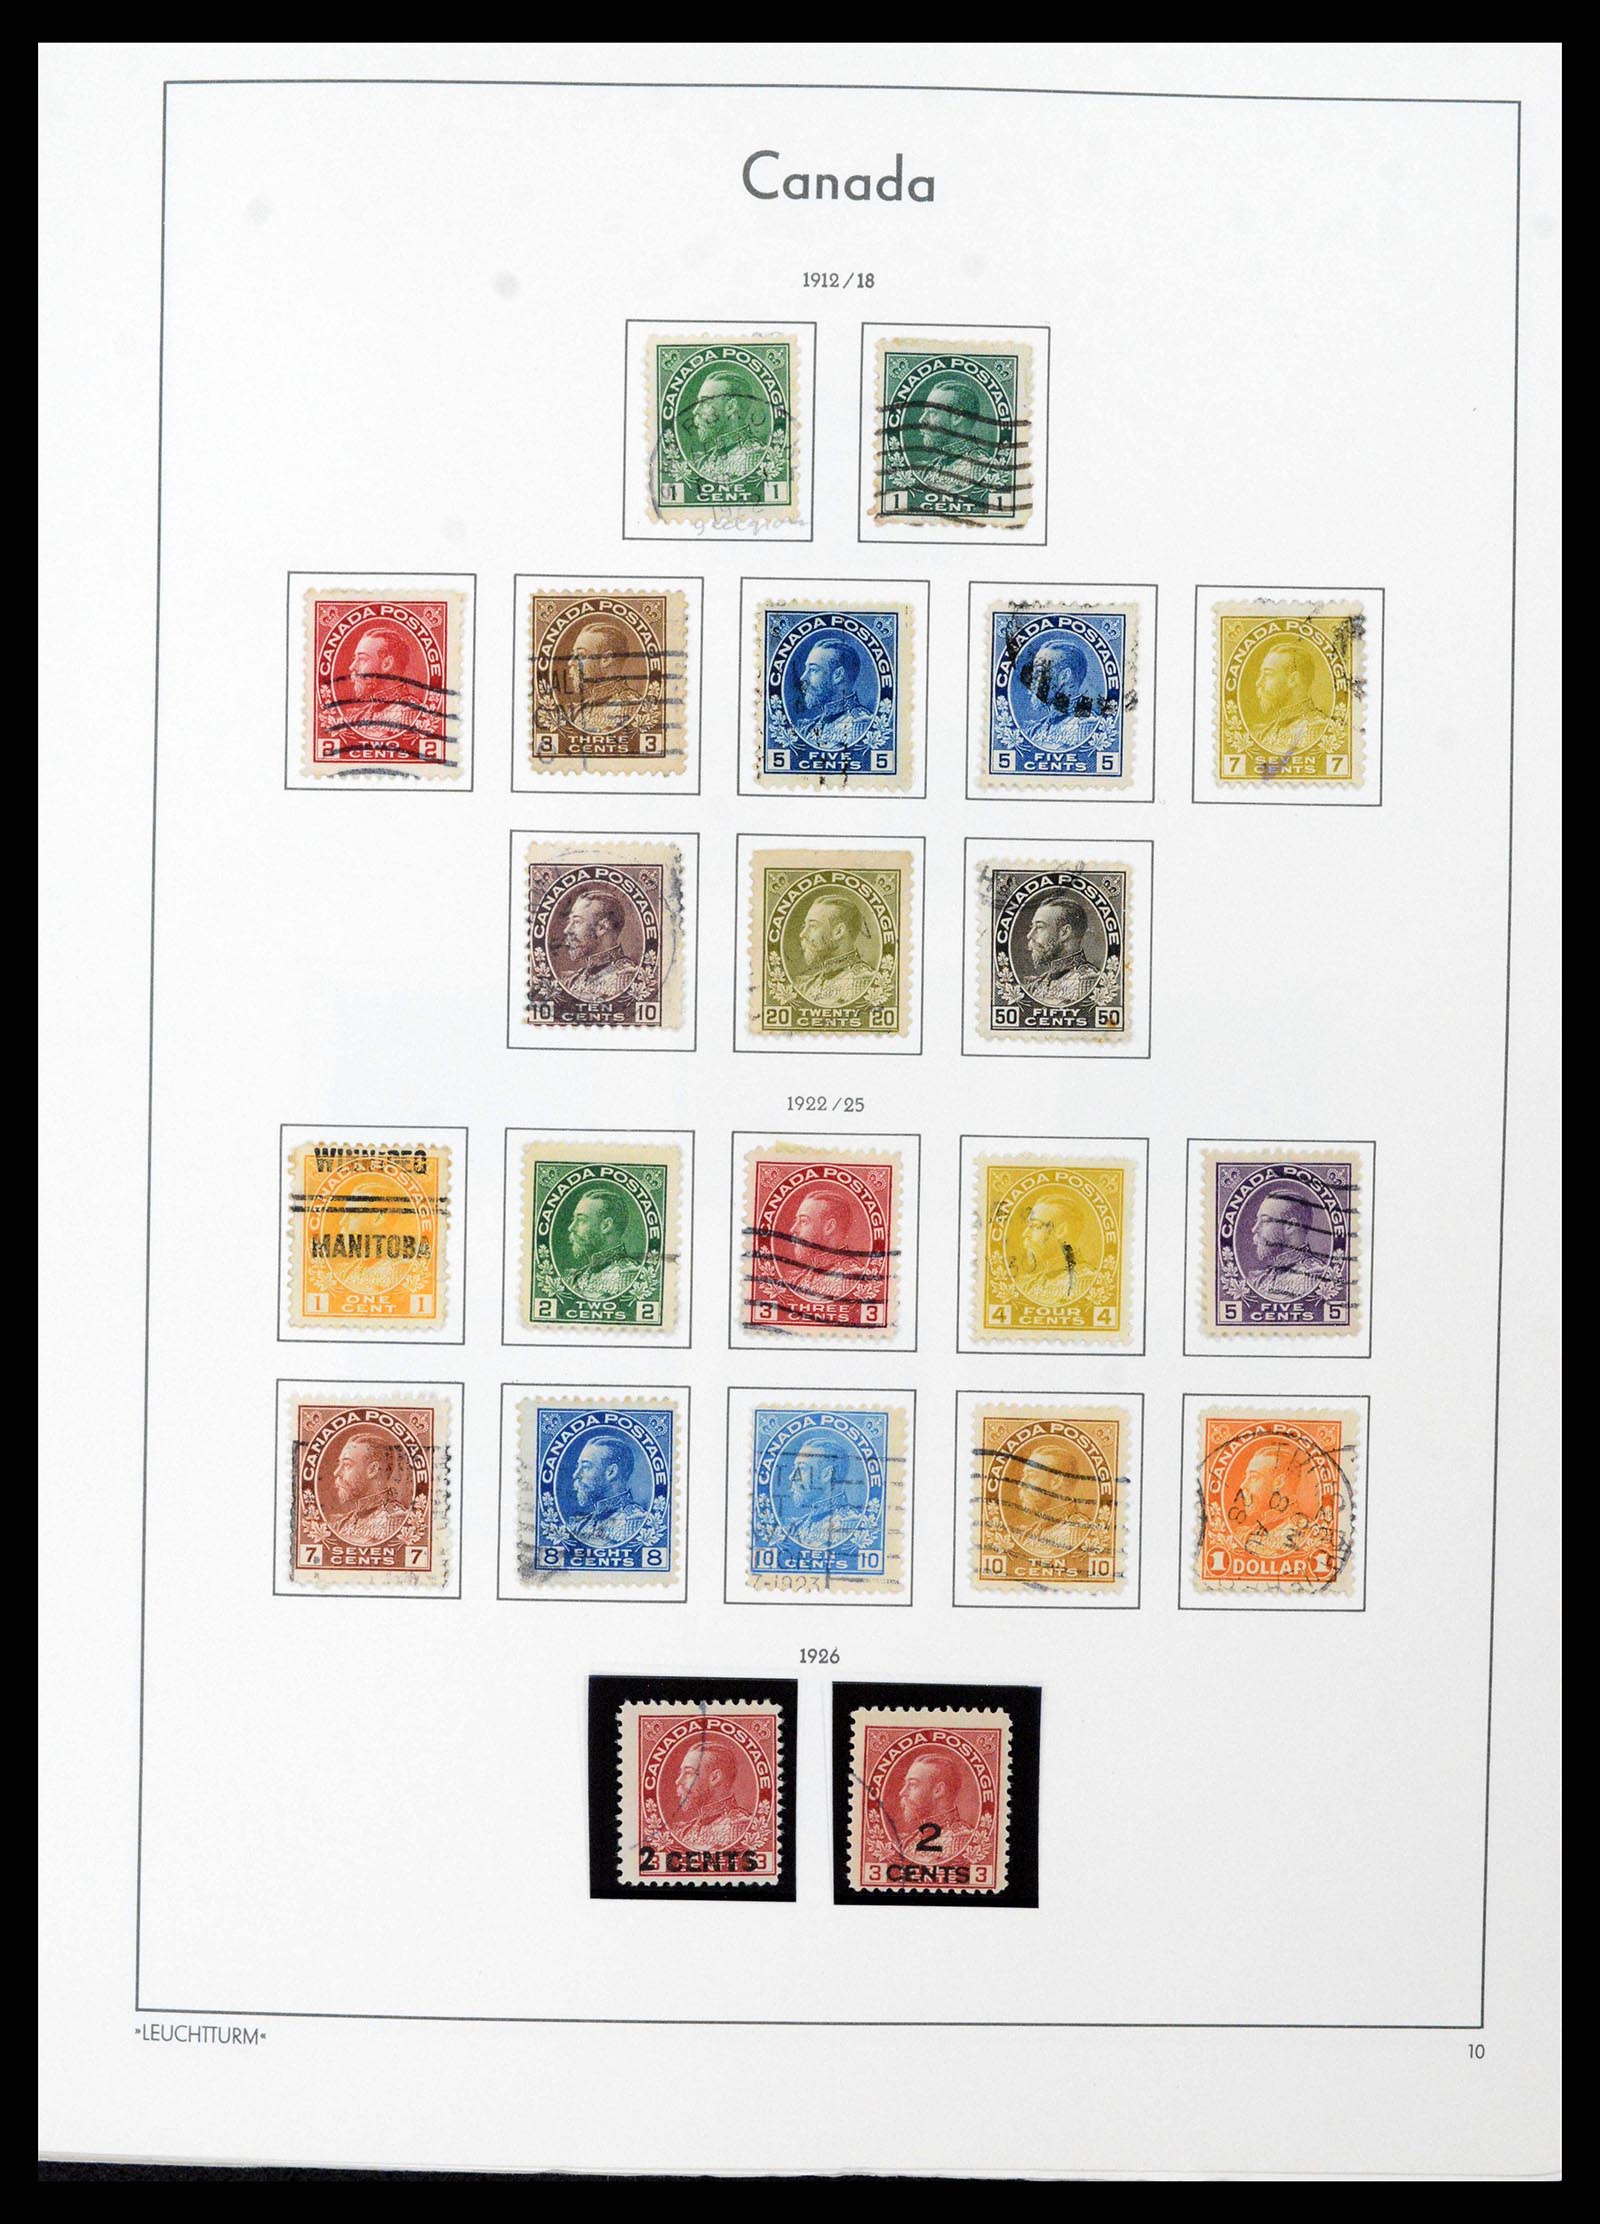 38475 0010 - Stamp collection 38475 Canada 1859-2000.